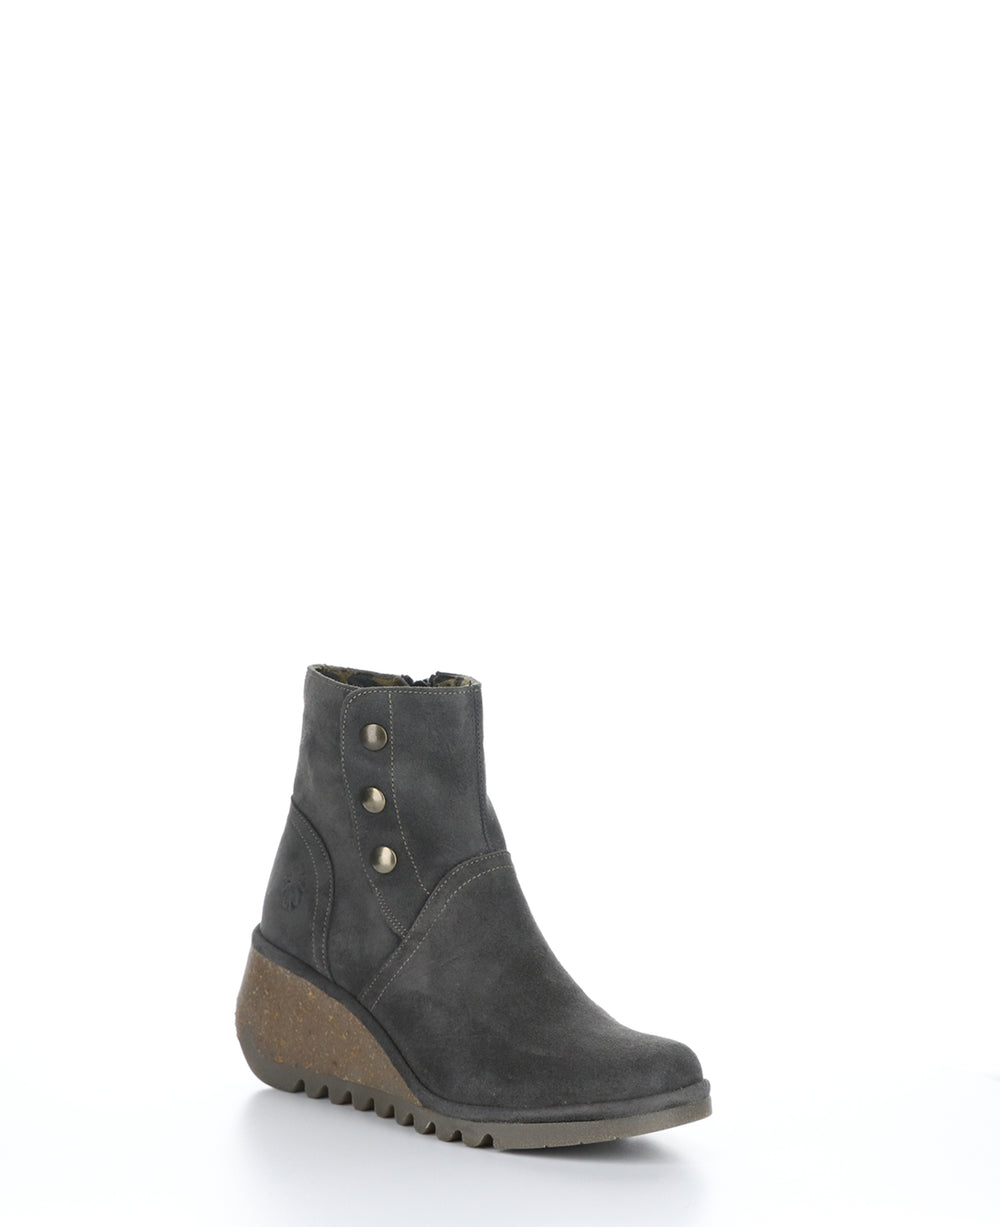 NERY336FLY Diesel Zip Up Ankle Boots